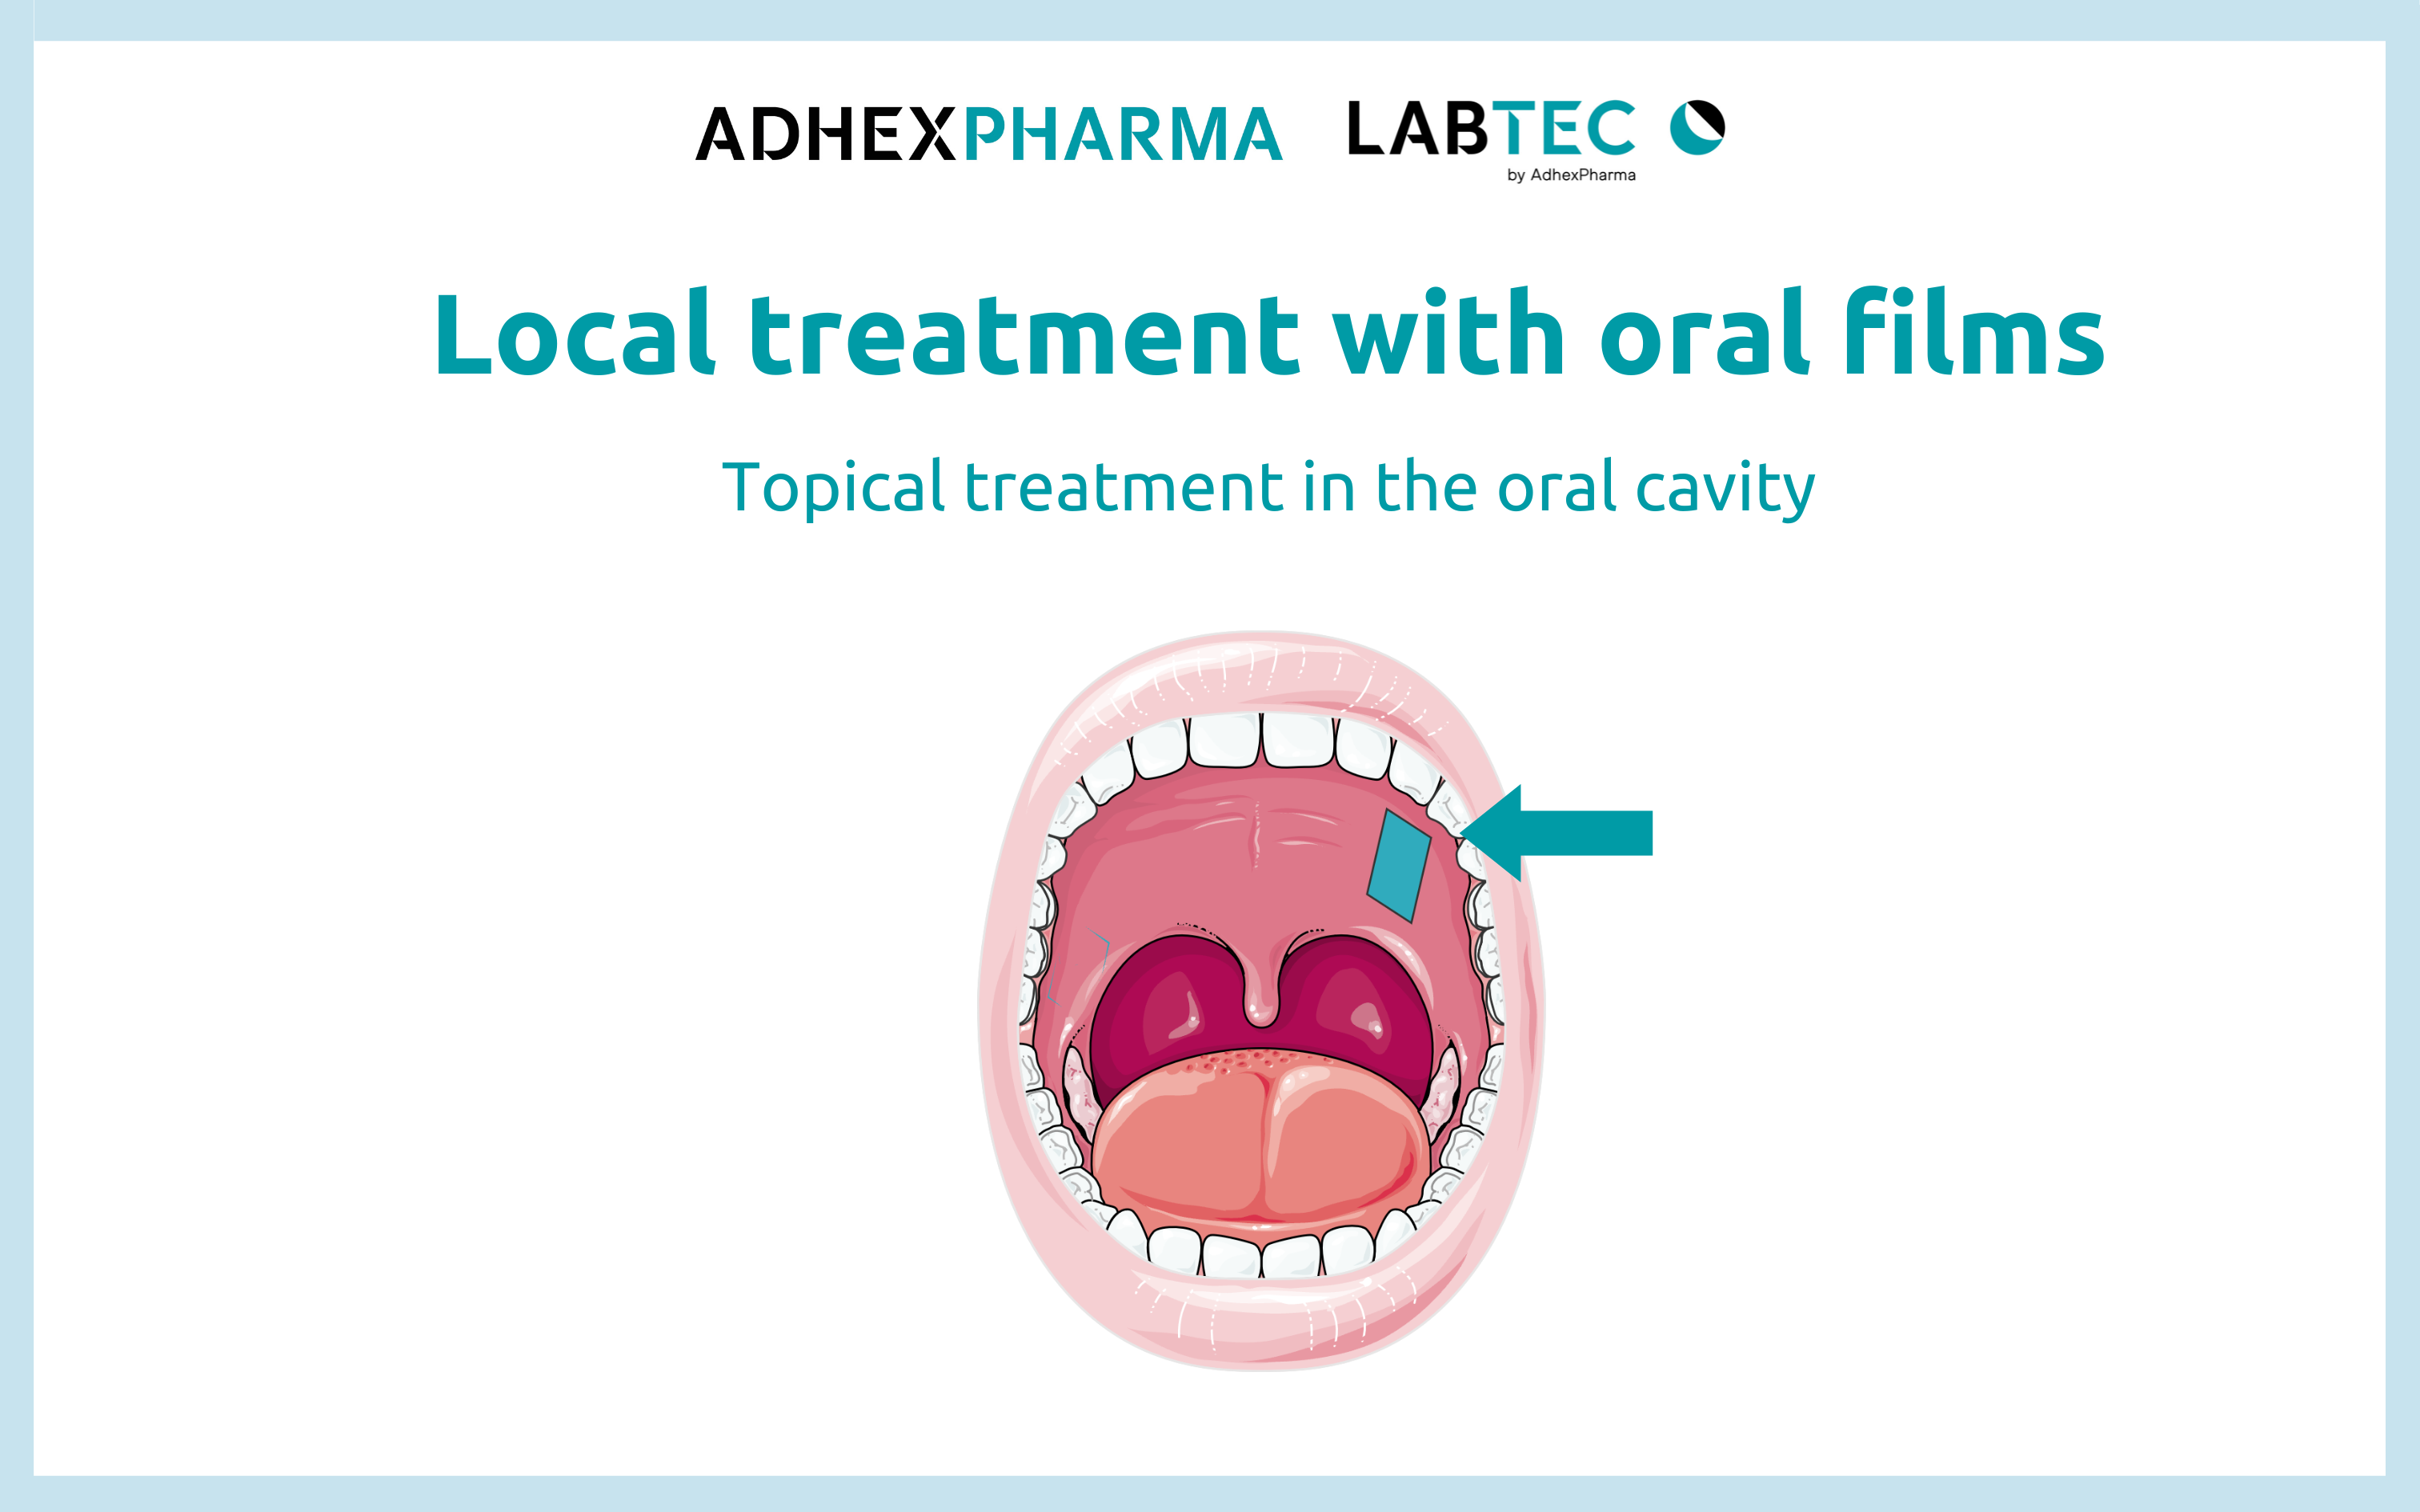 Local treatment with oral films